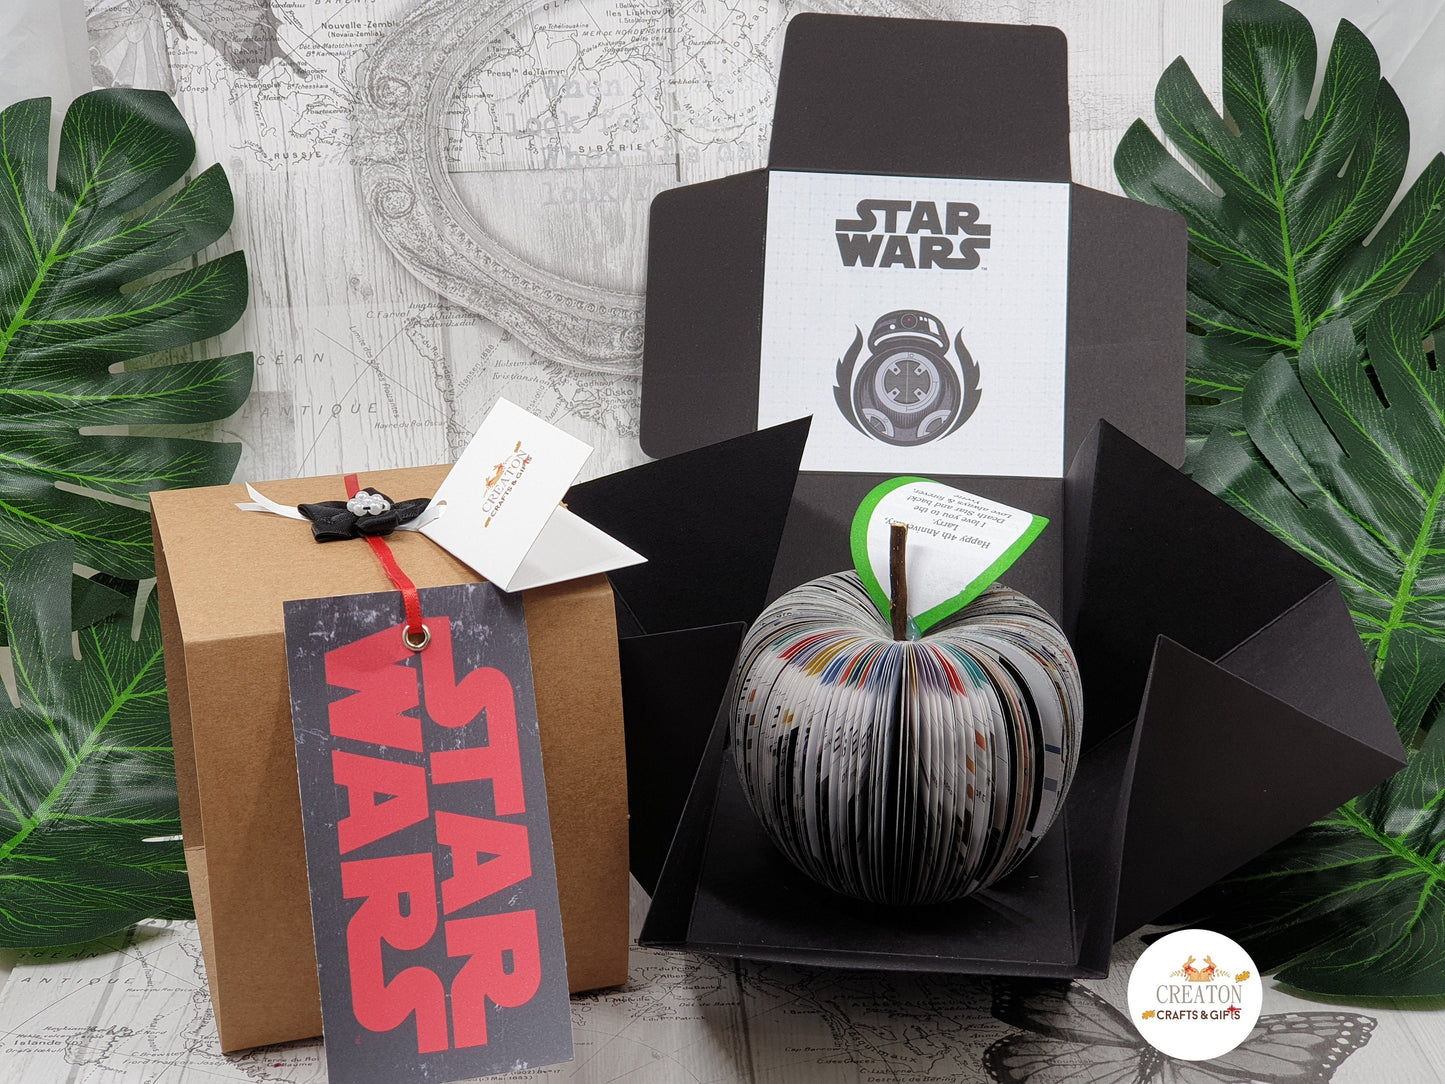 Star Wars Book Gift with Card